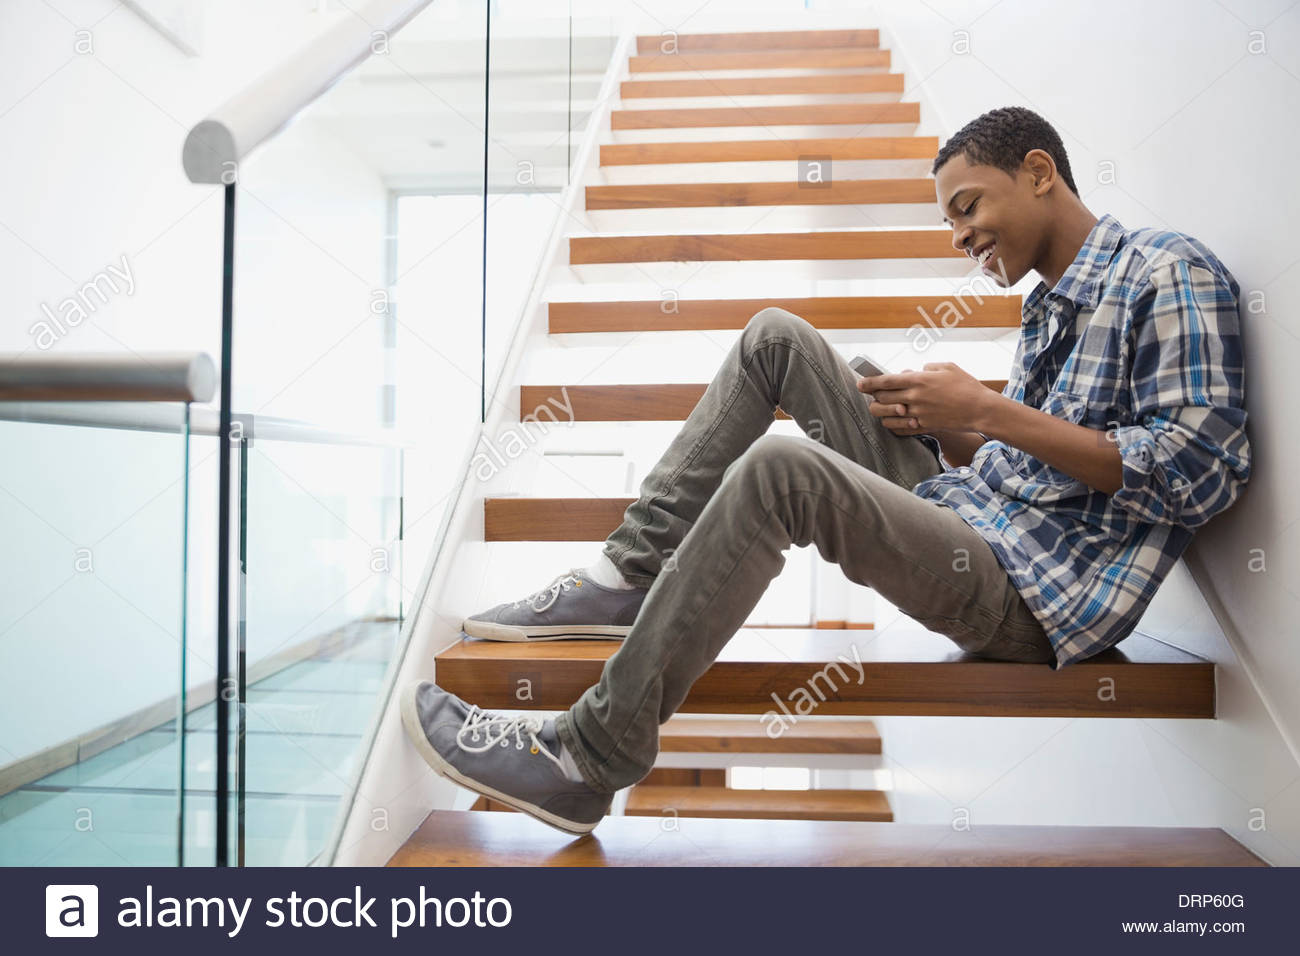 Teen text messaging on steps at home Stock Photo